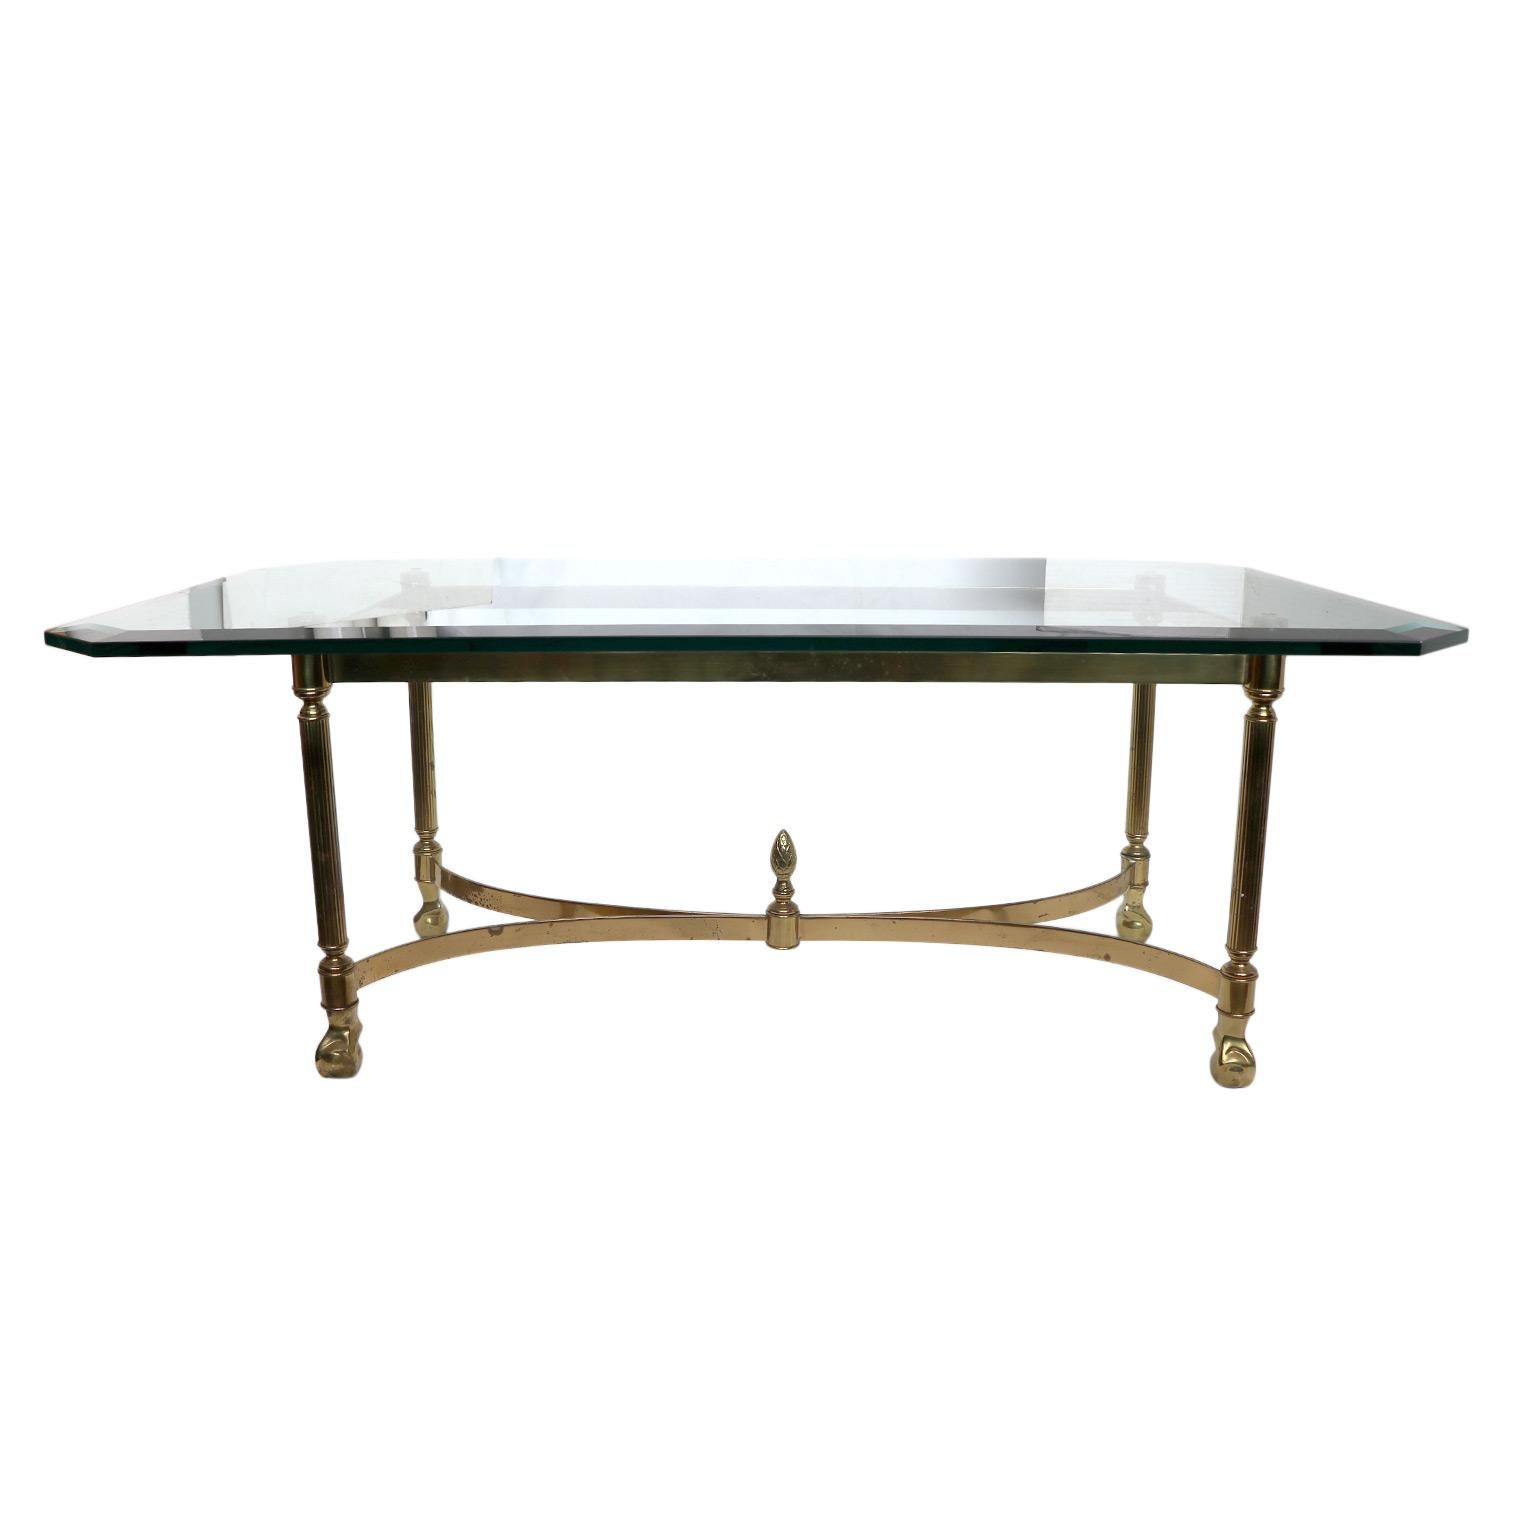 A vintage coffee table with a glass top. A wonderful addition to your living space. Minimal wear to the glass.